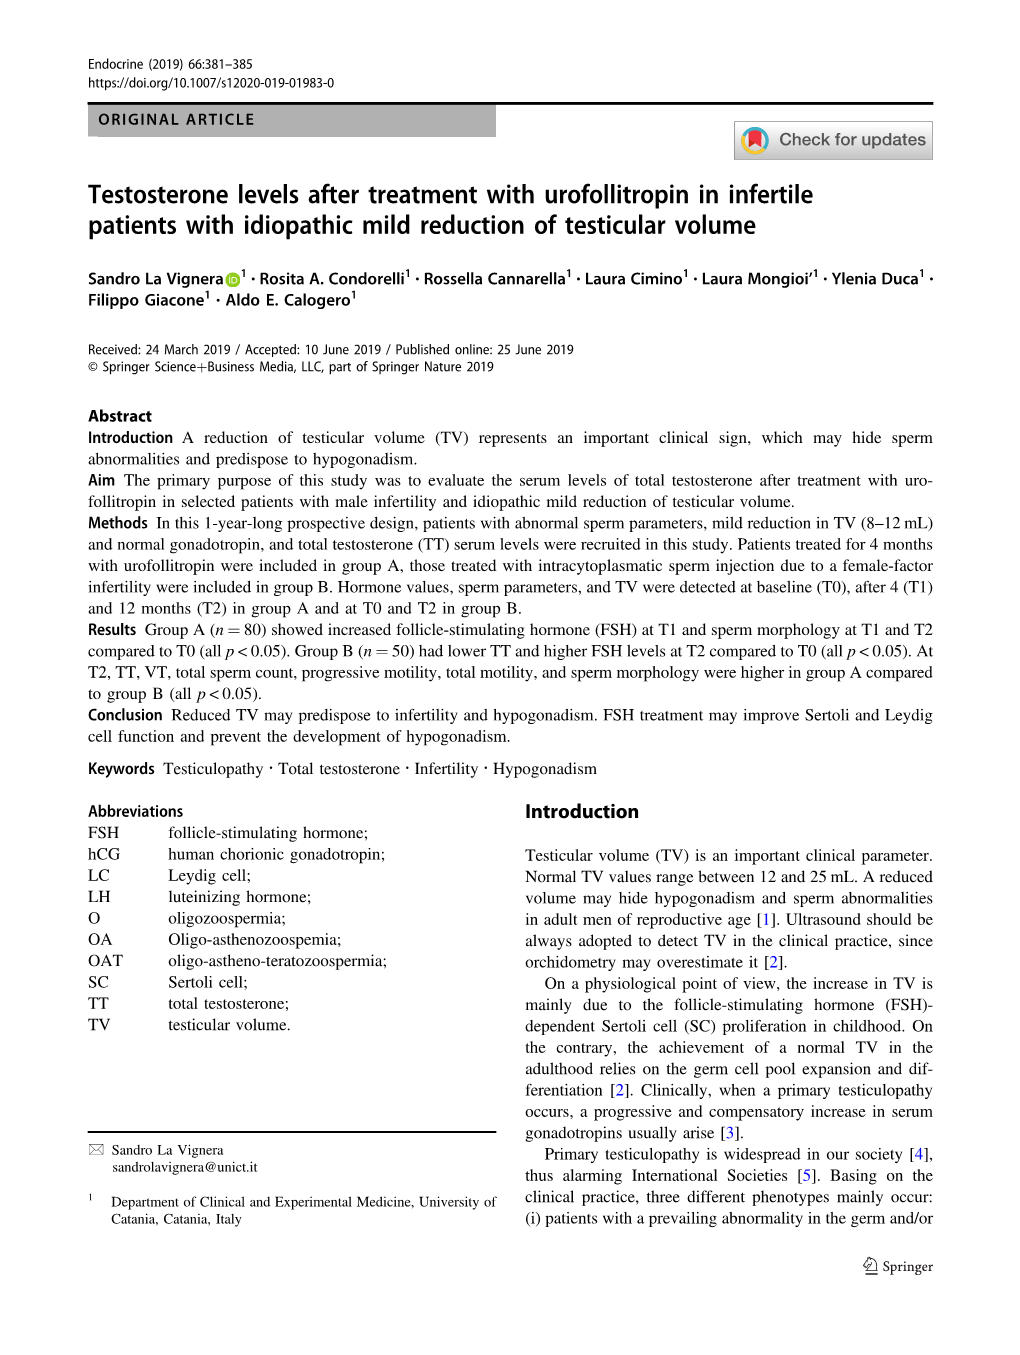 Testosterone Levels After Treatment with Urofollitropin in Infertile Patients with Idiopathic Mild Reduction of Testicular Volume